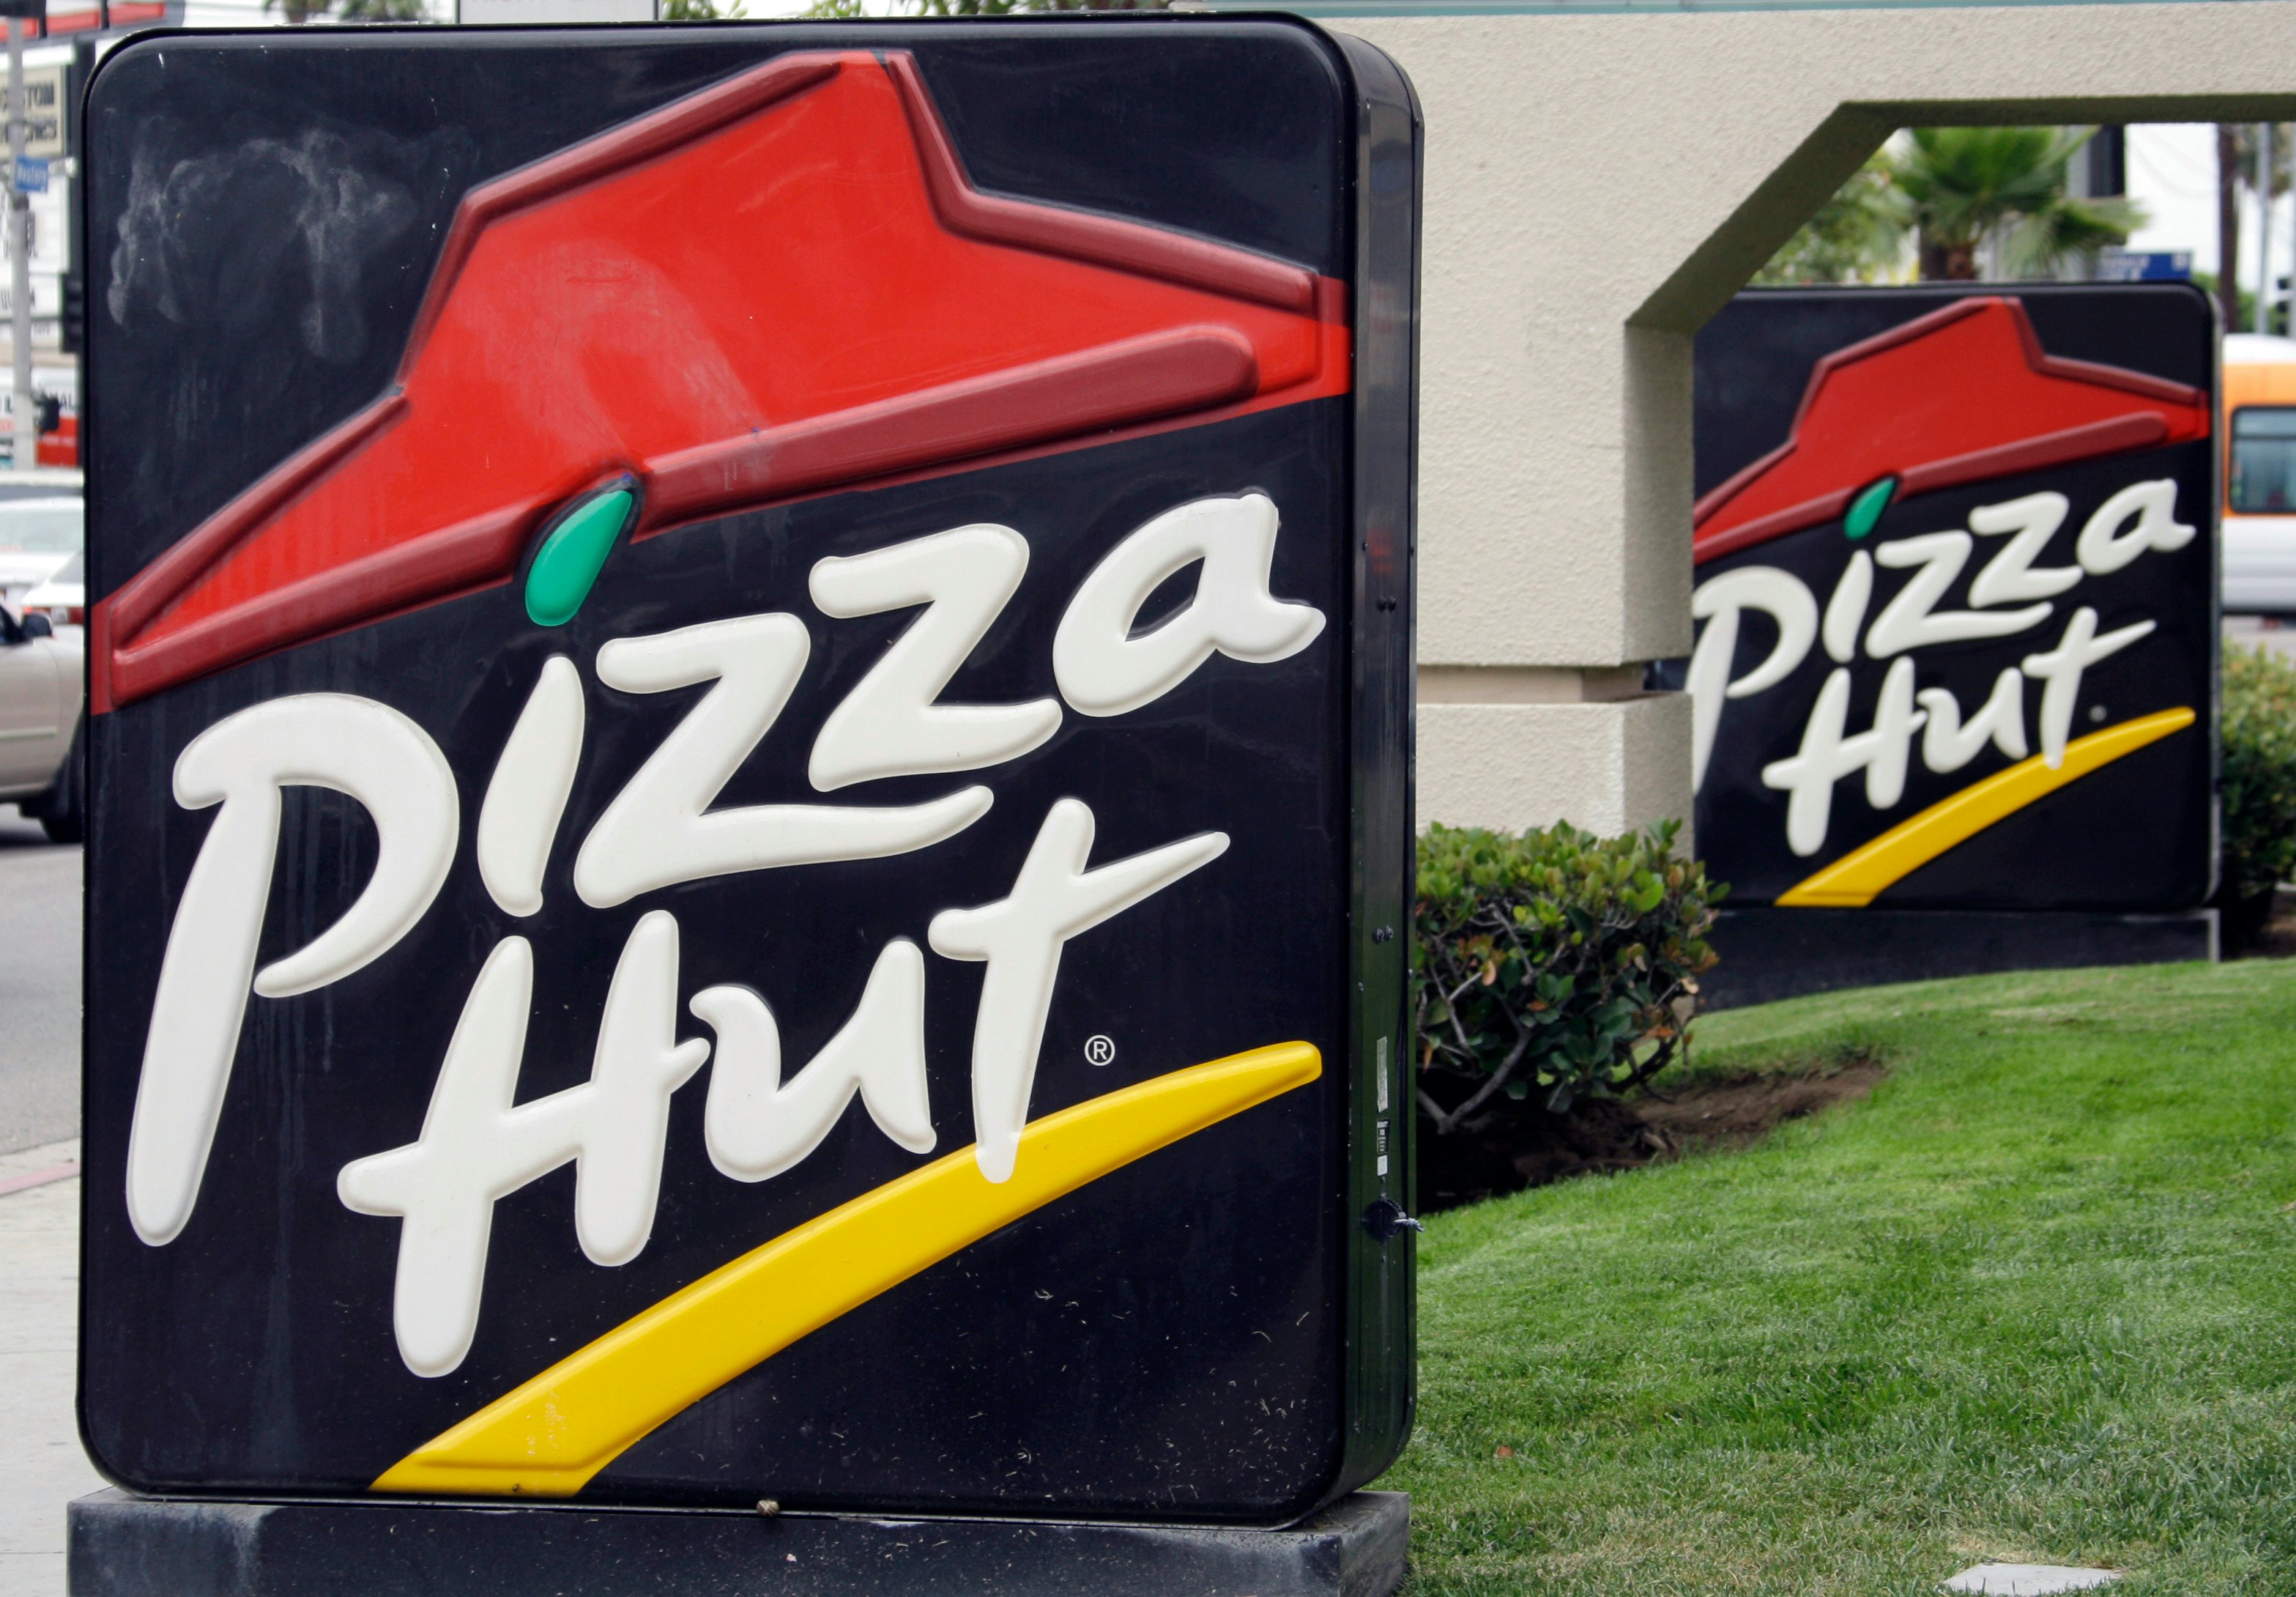 Florida Woman Escapes Hostage Situation With Order From Pizza Hut